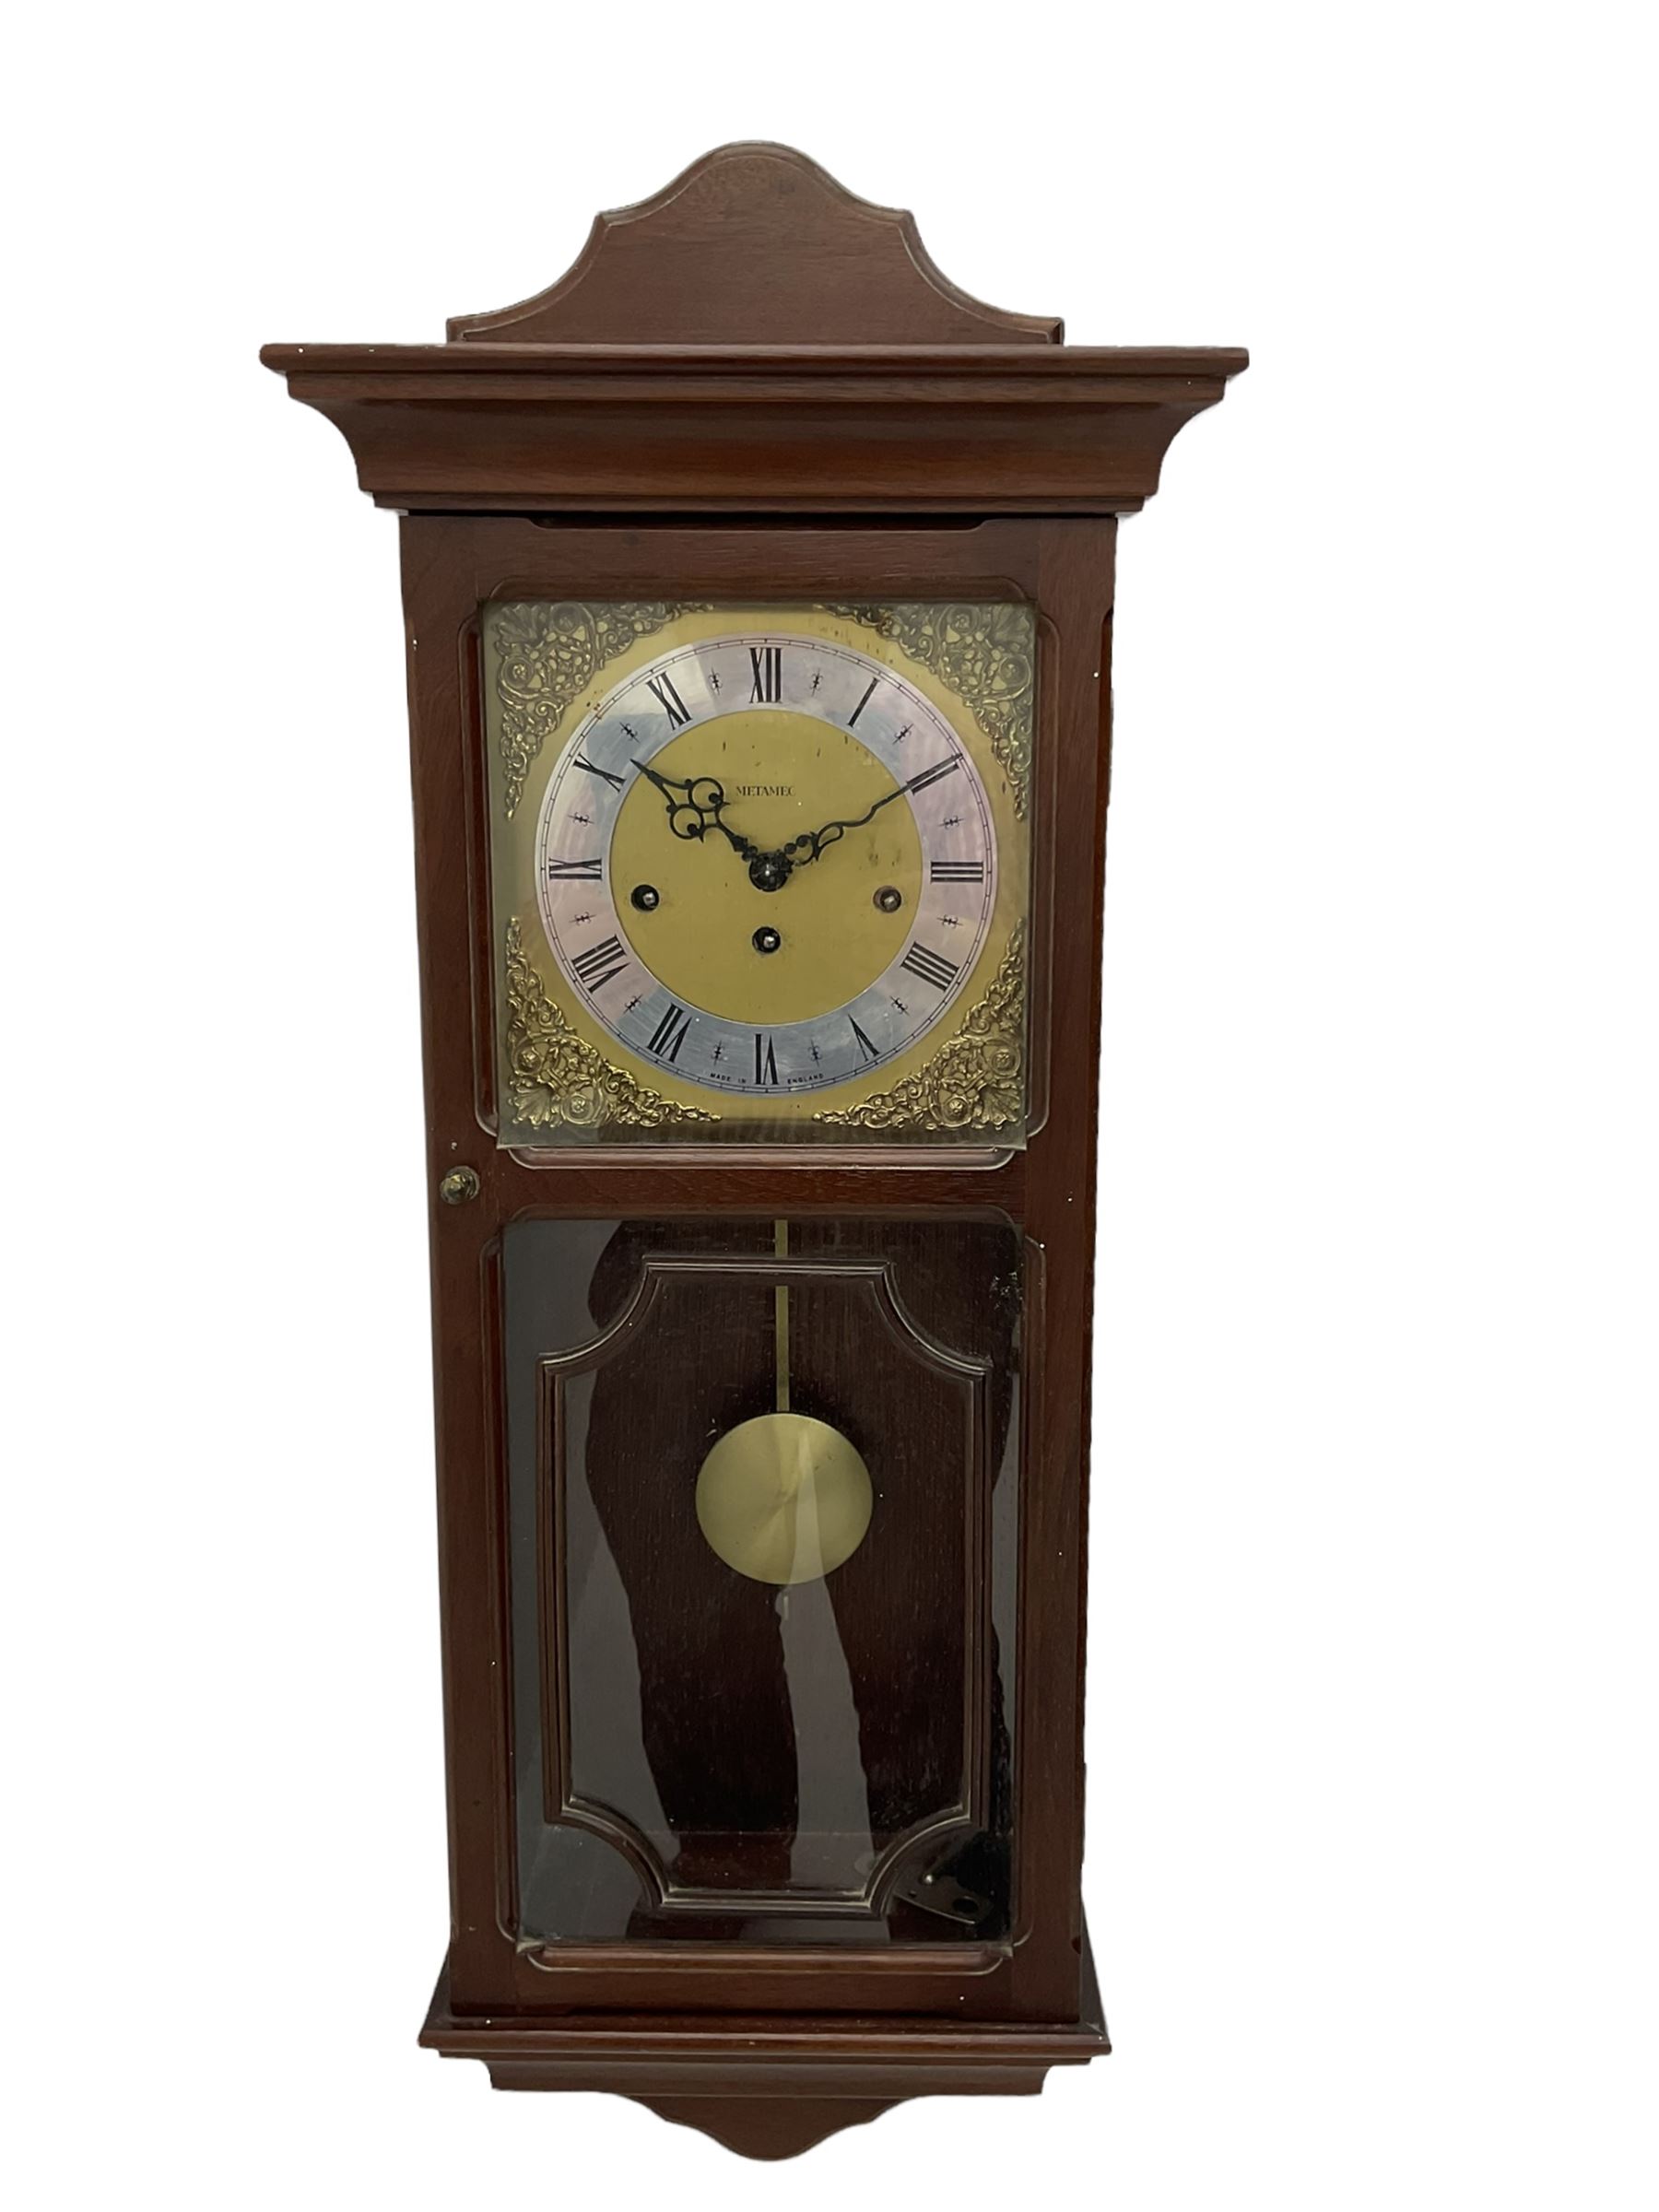 A 20th century wall clock in a simulated mahogany case with a two-part glazed door